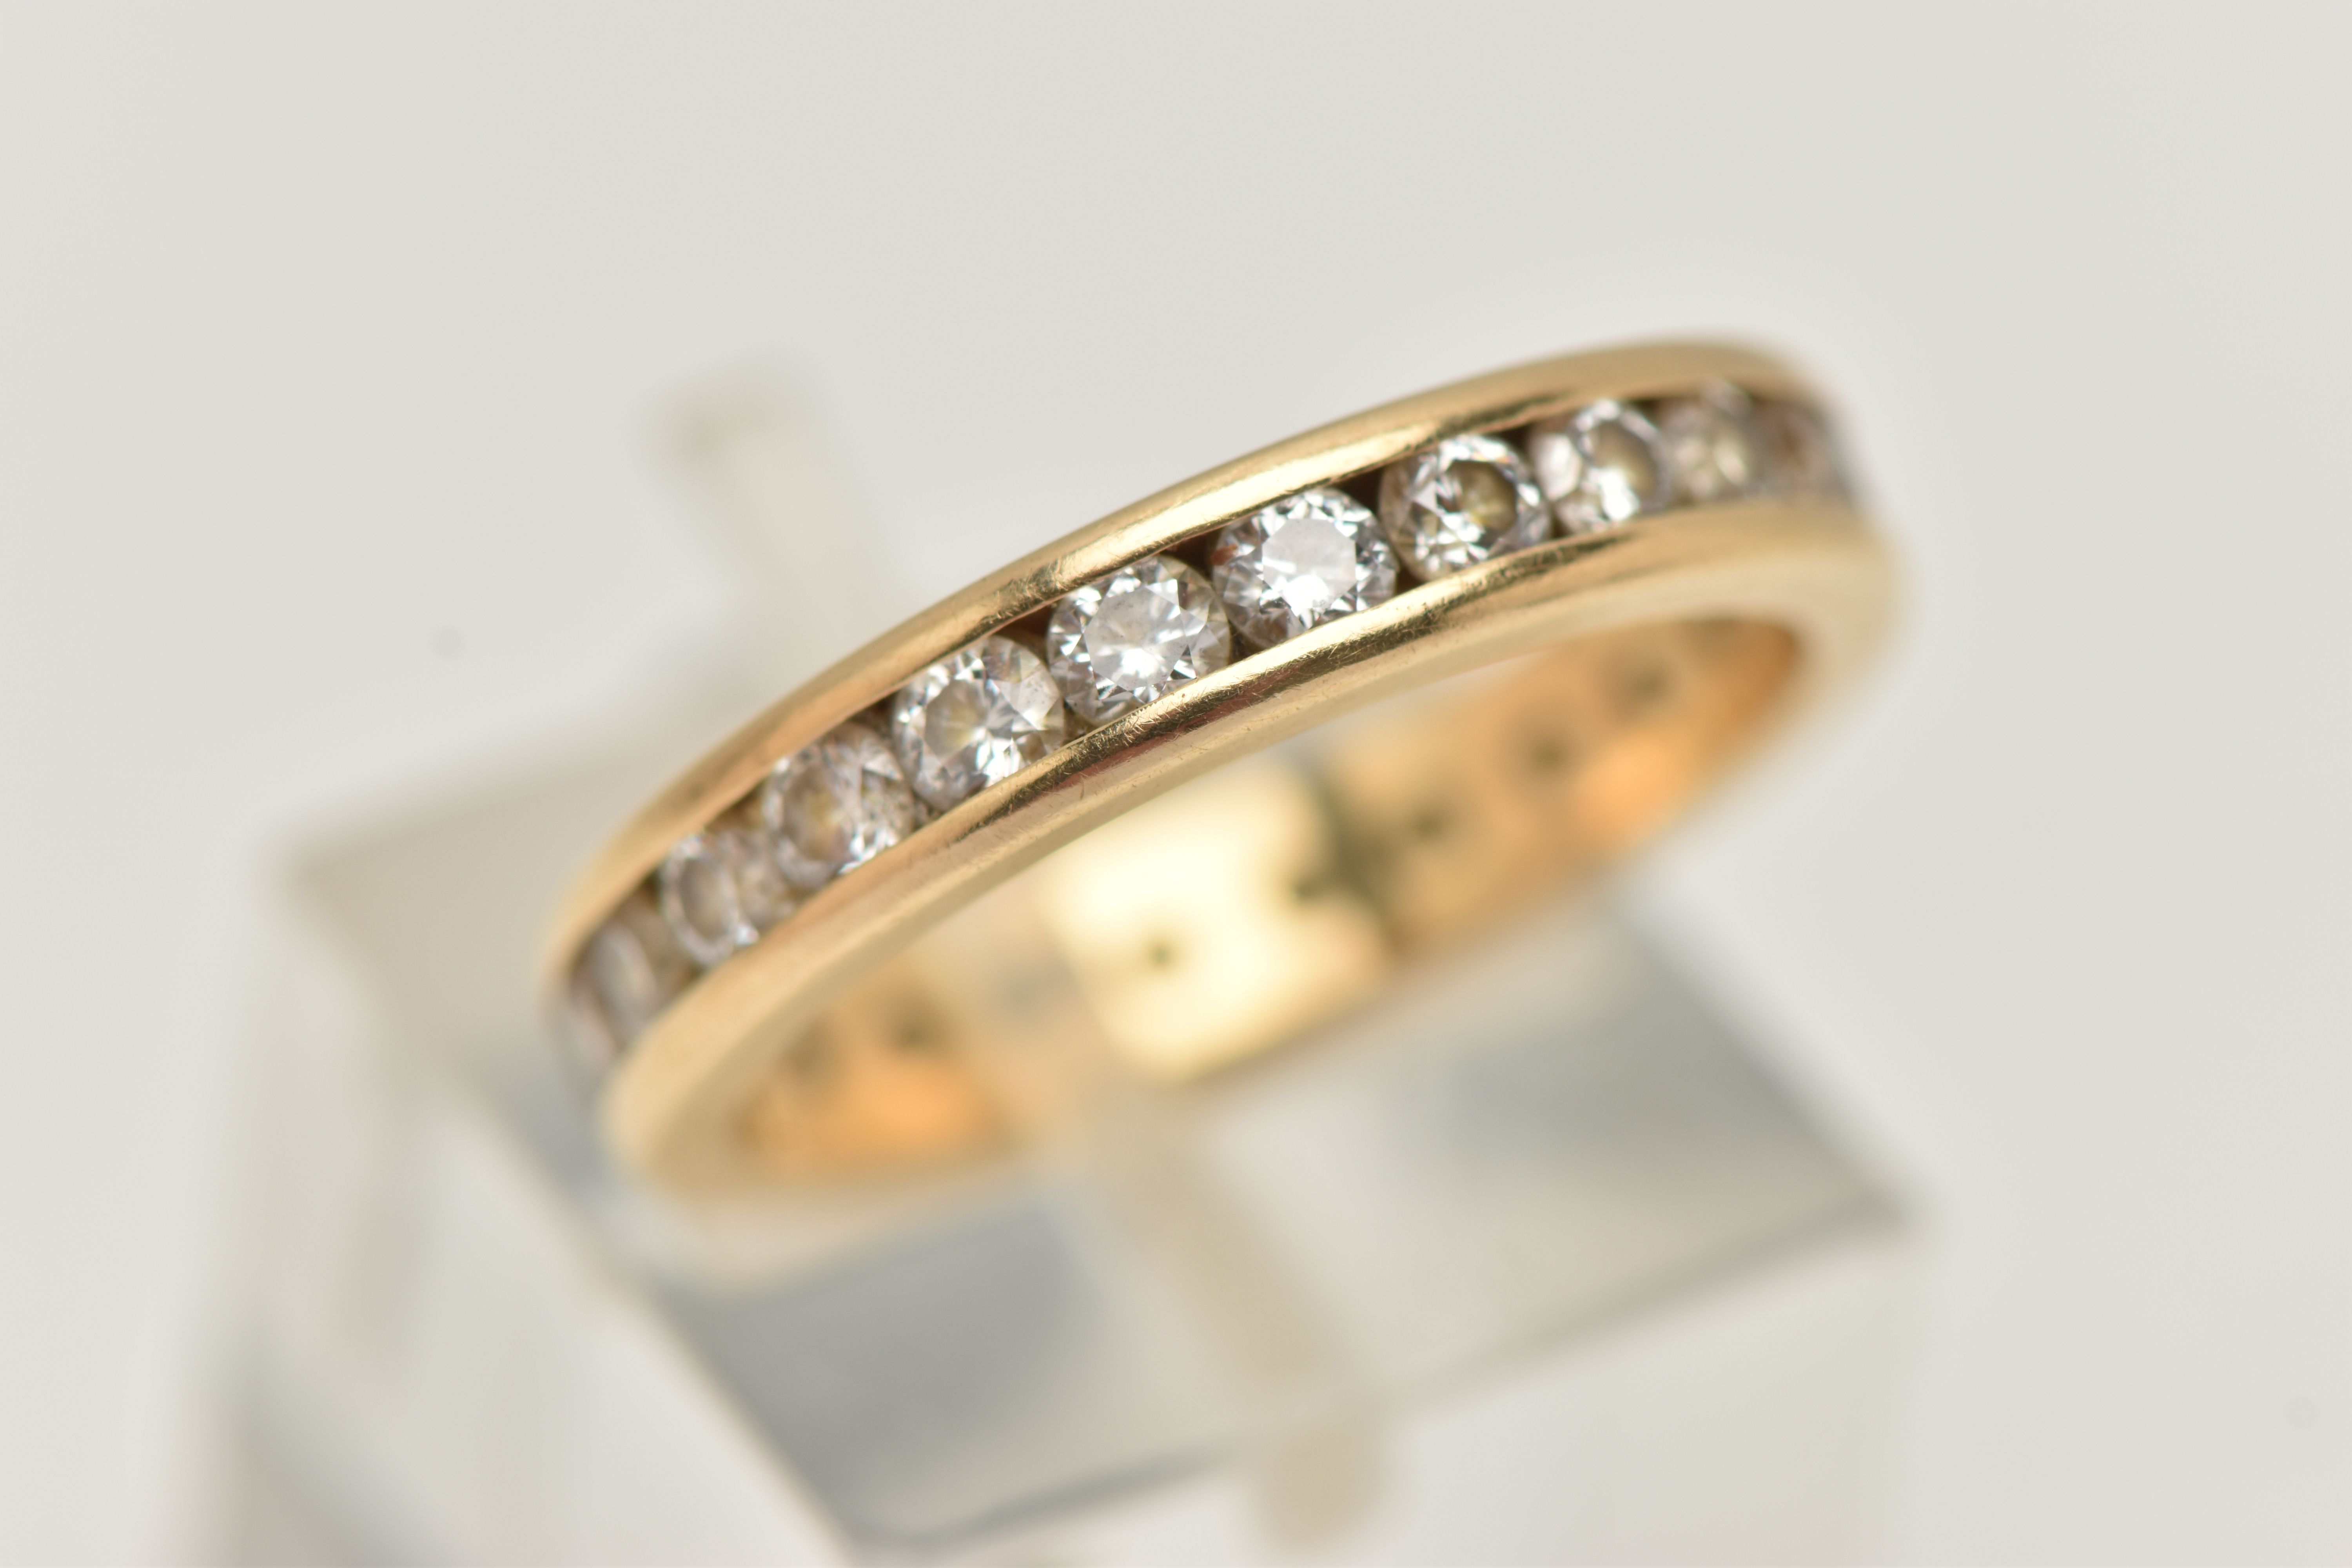 AN 18CT GOLD DIAMOND FULL ETERNITY BAND RING, channel set with twenty four round brilliant cut - Image 4 of 4